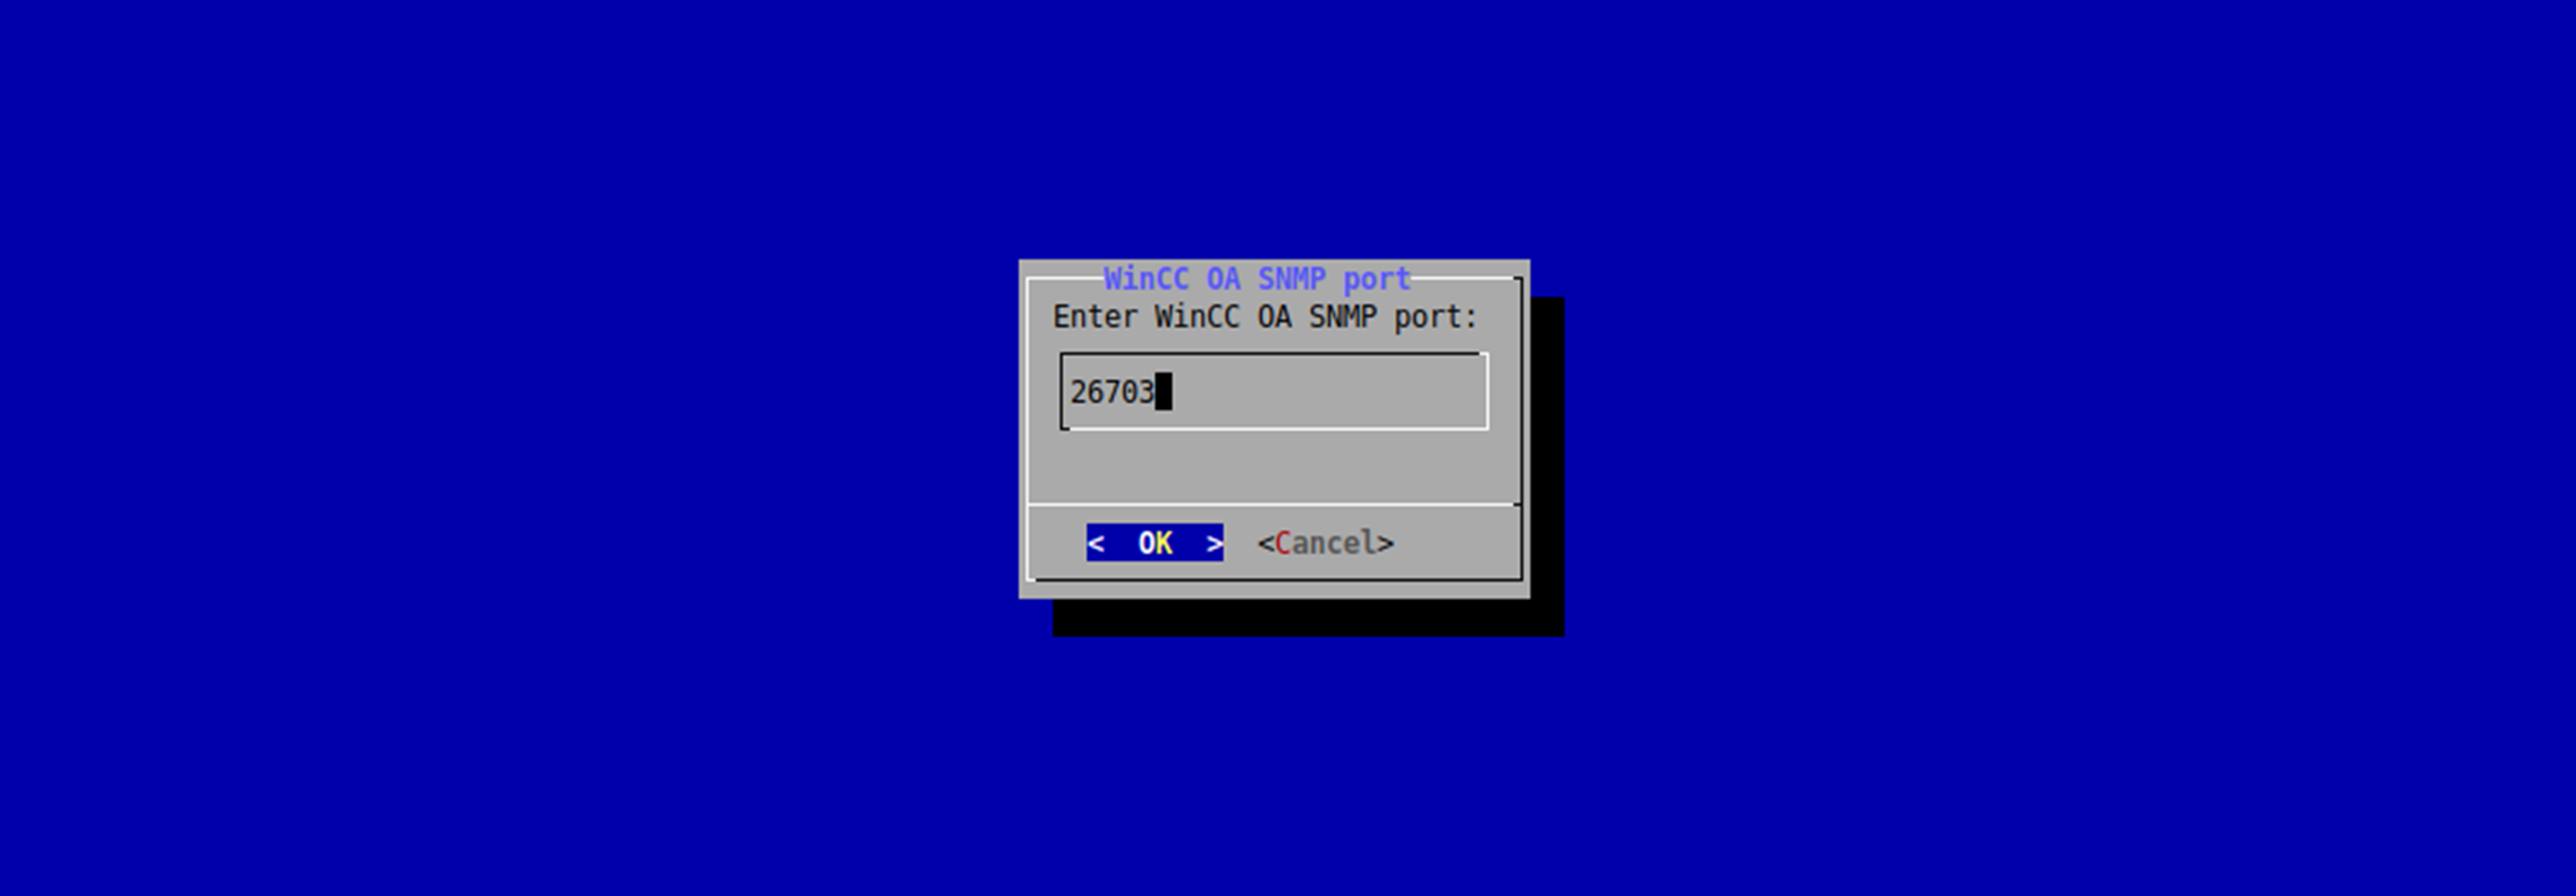 mid-configuration-13-new-container-wincc-oa-snmp-port